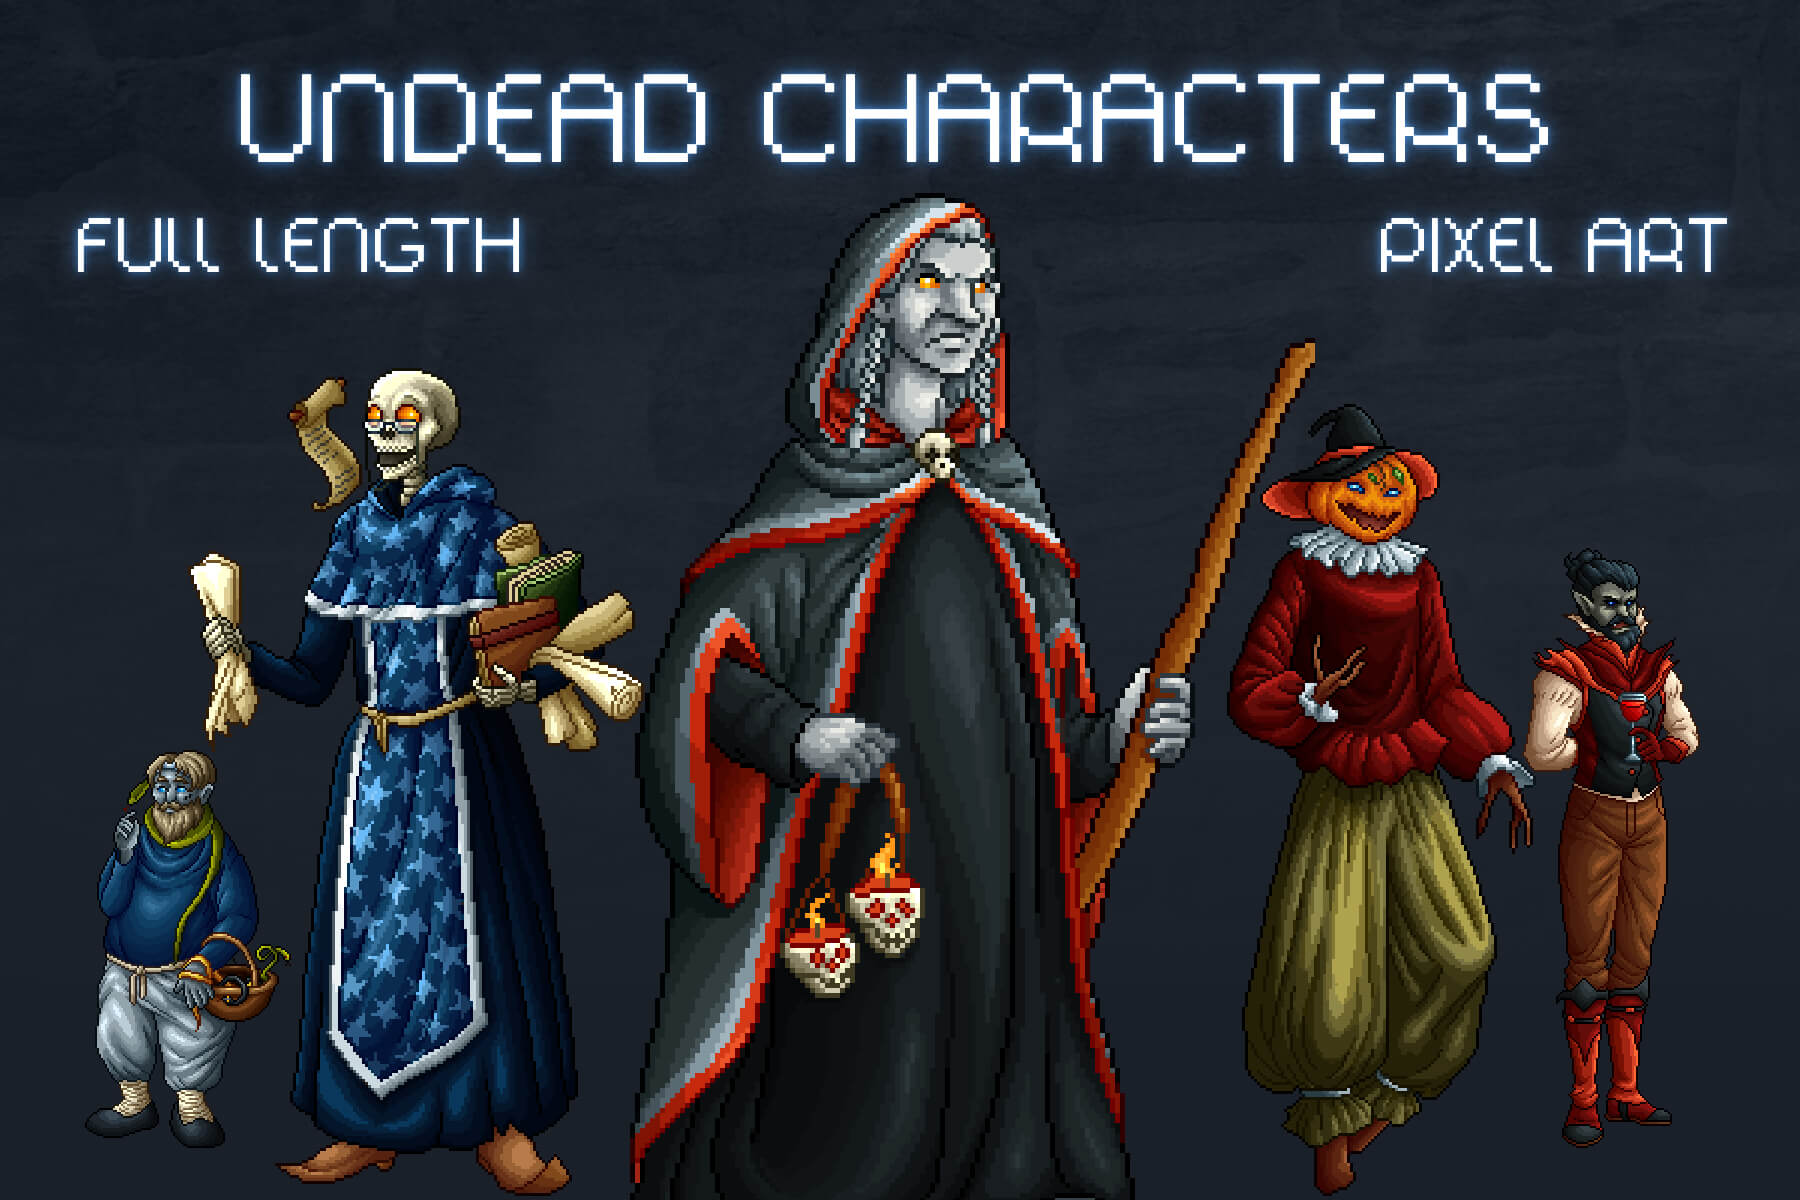 Undead Characters Full Length Pixel Art